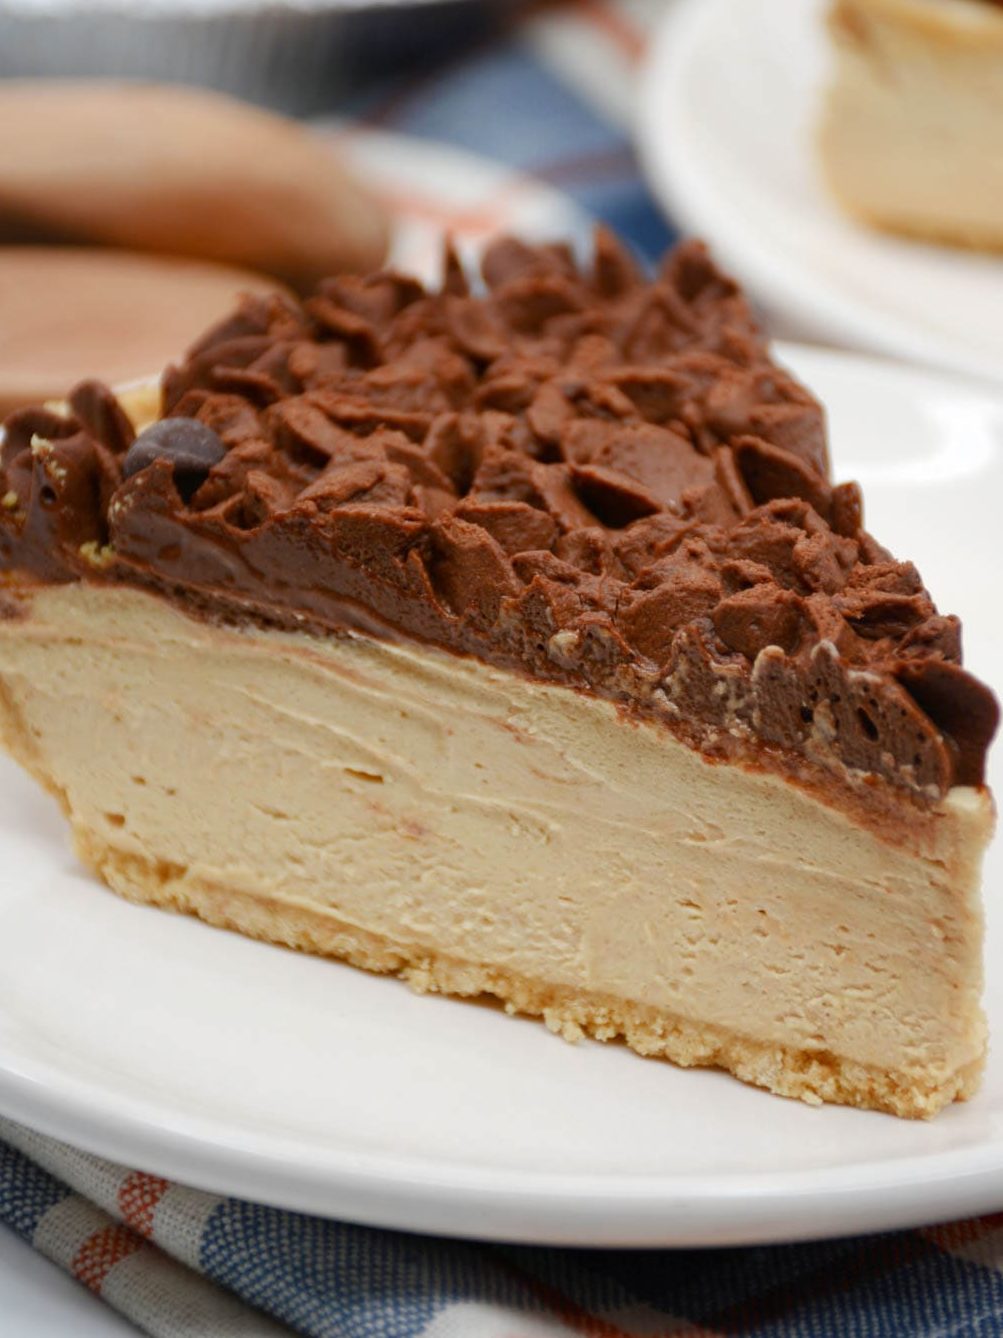 No-Bake Cream Cheese Peanut Butter Pie with Chocolate Whipped Cream